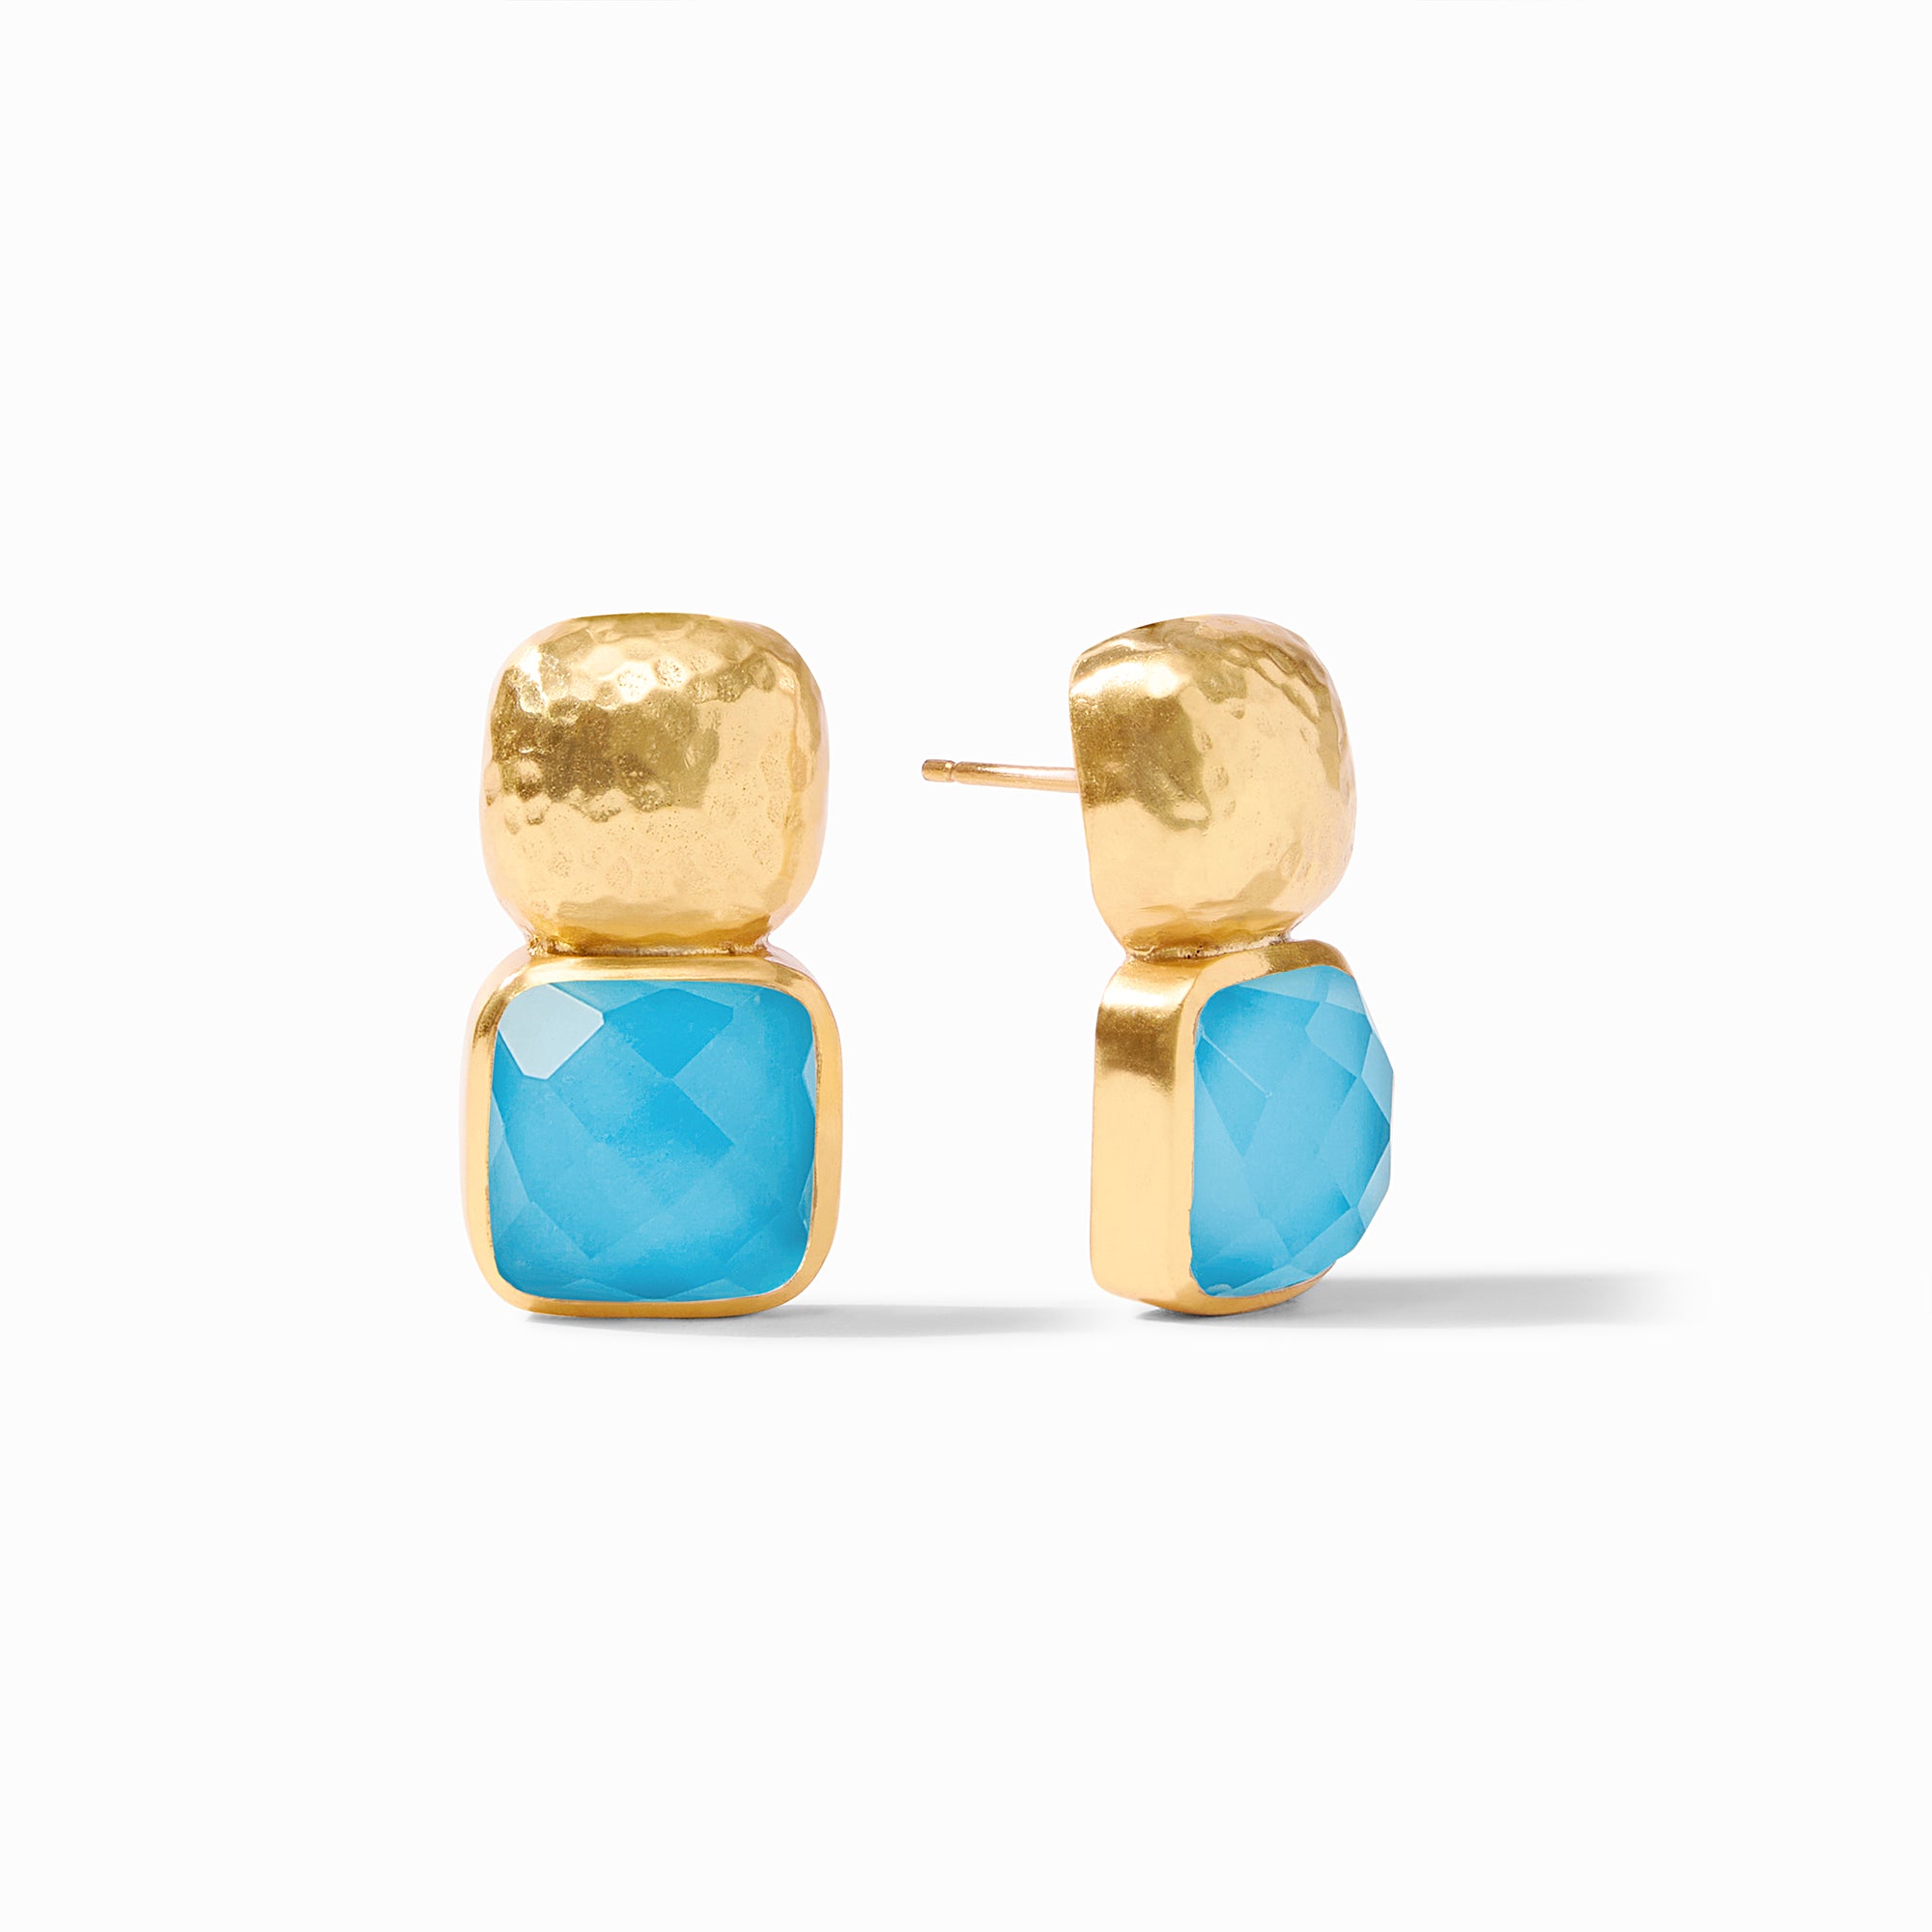 Julie Vos - Catalina Earring, Iridescent Pacific Blue